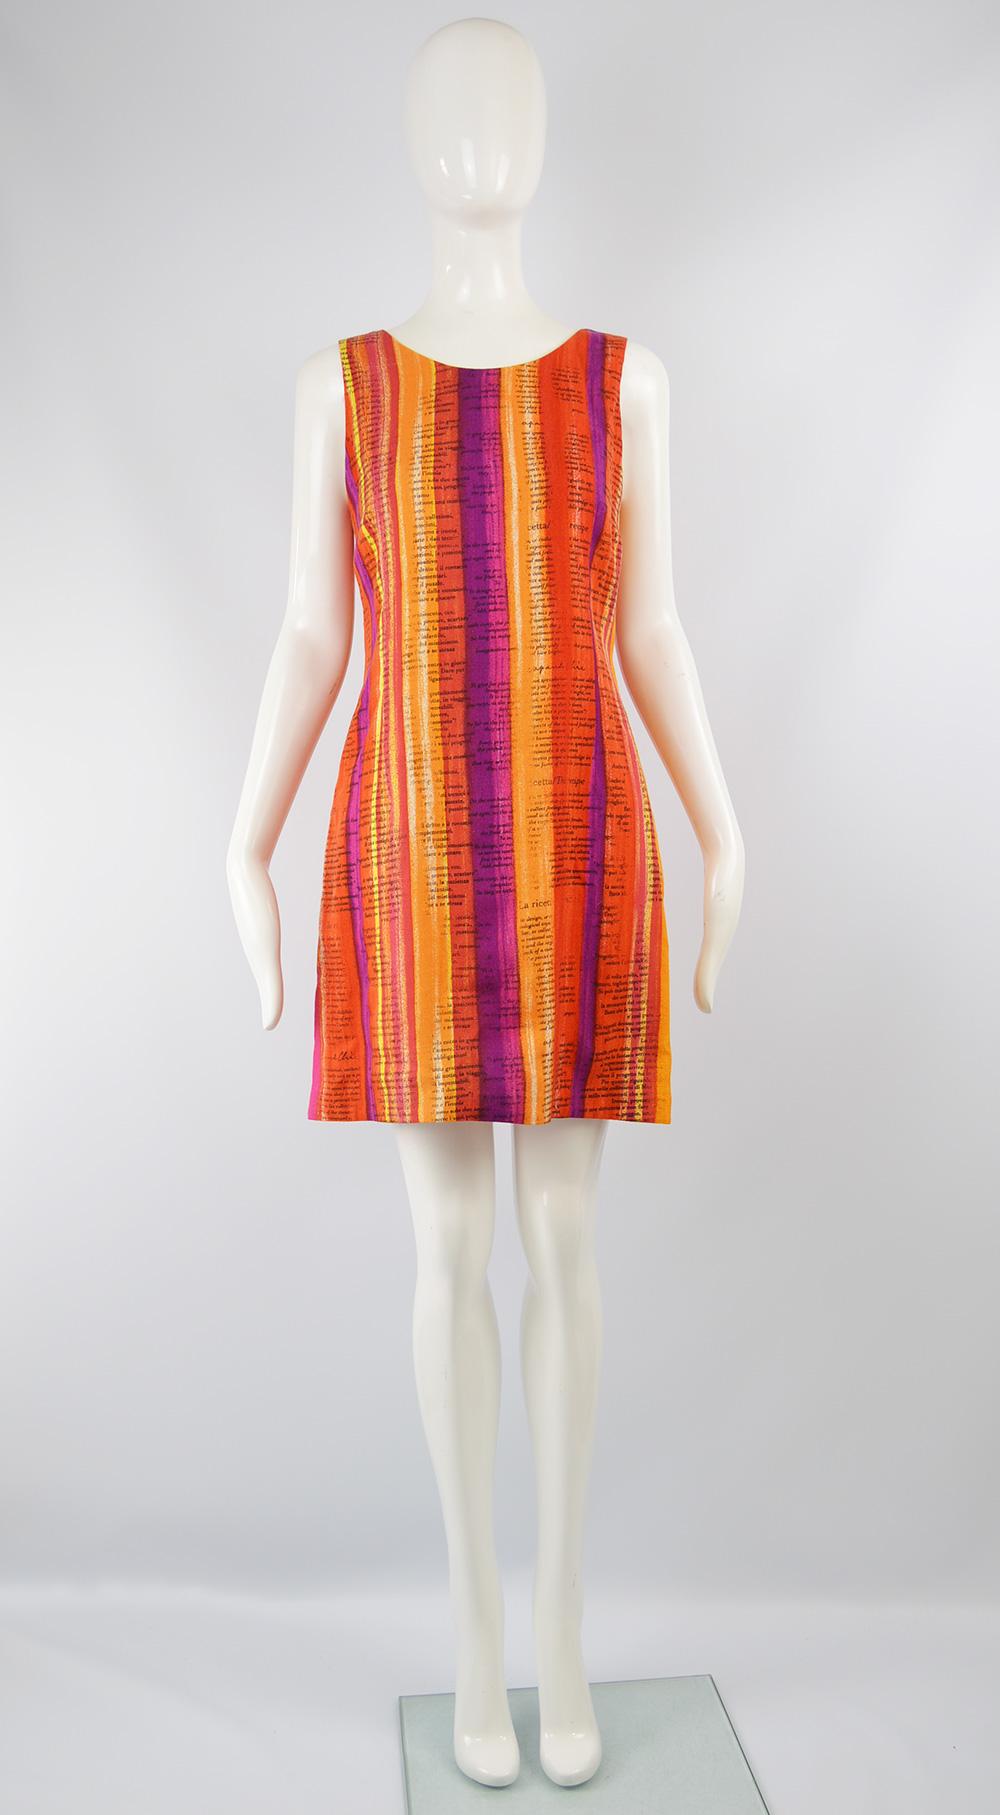 A bold and fun vintage women's dress from the 90s by Moschino for the Cheap and Chic line. In a rayon fabric that is woven in such a way that it feels like linen and has watercolor inspired stripes in hues of oranges, purples, reds and white to